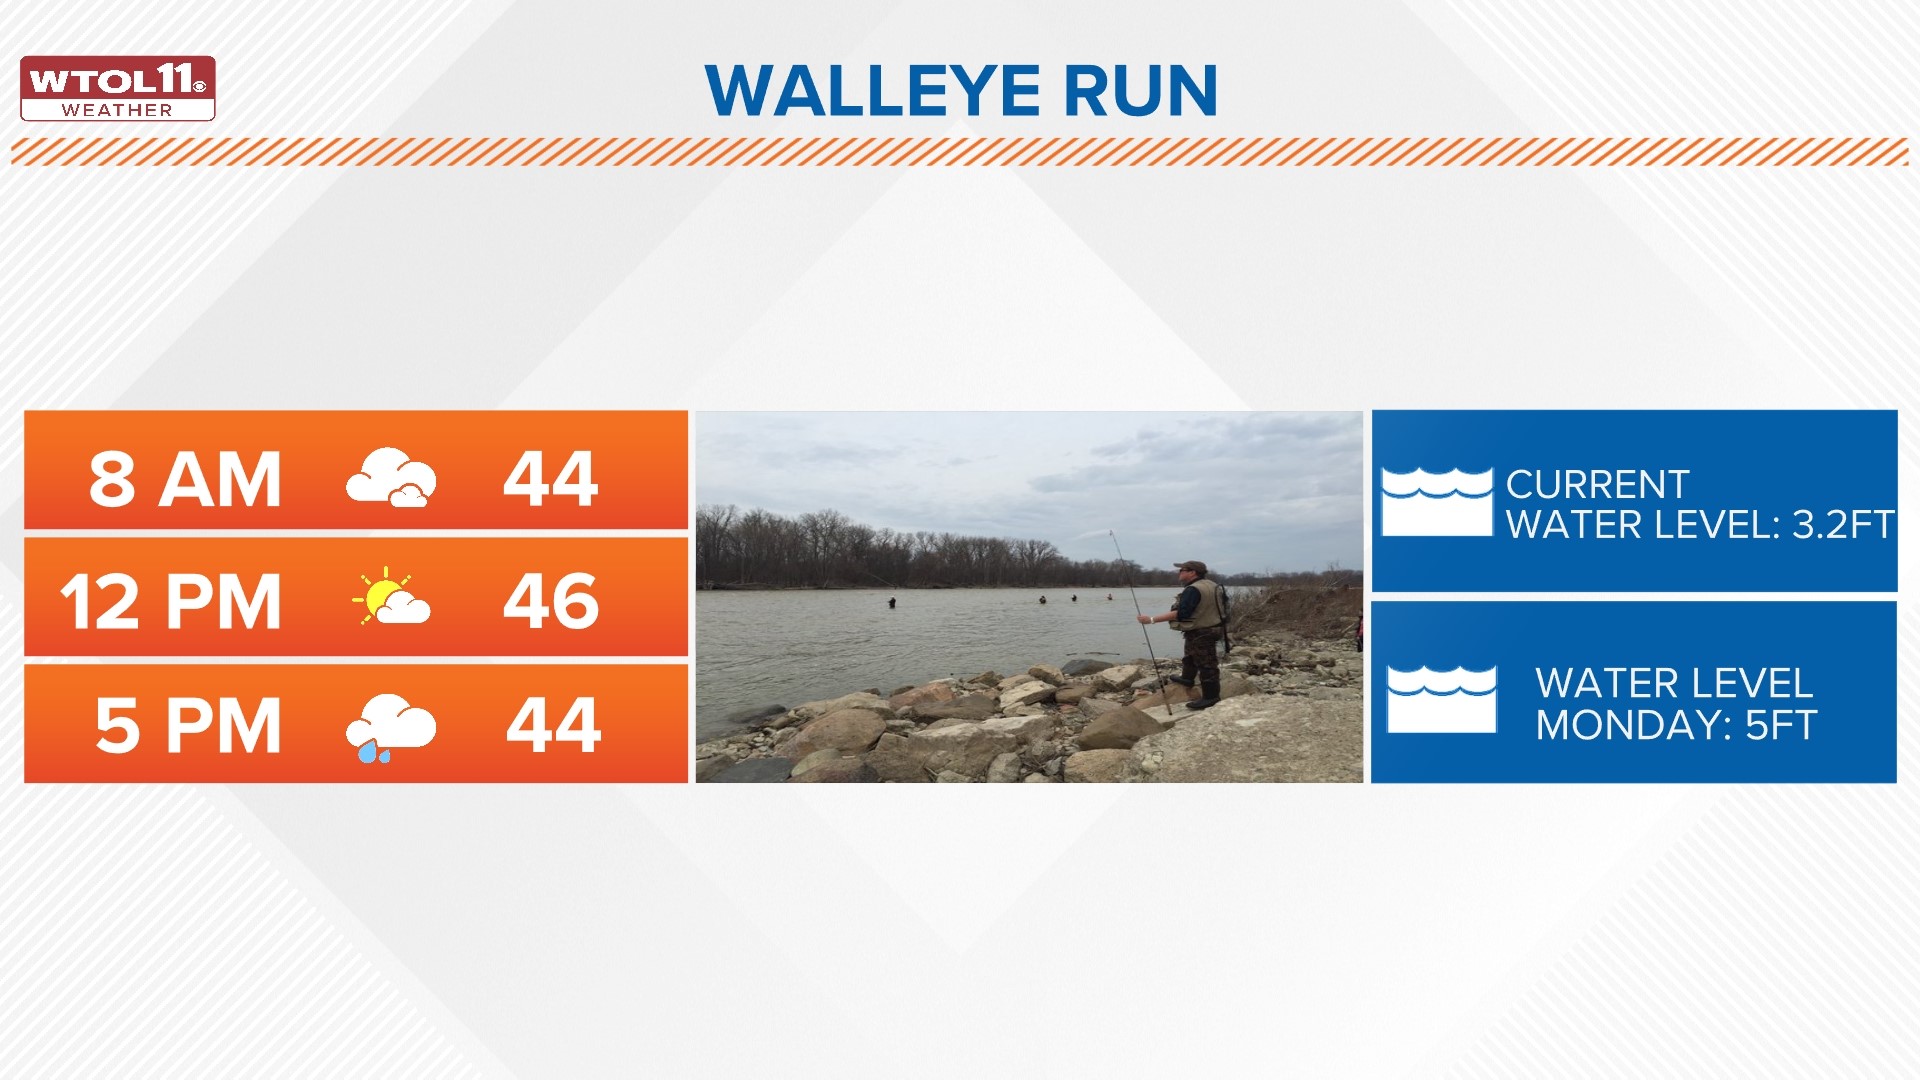 Heading down to the Maumee for the Walleye Run this weekend? Meteorologist Diane Phillips breaks down how the rain will change the Maumee's water levels this weekend